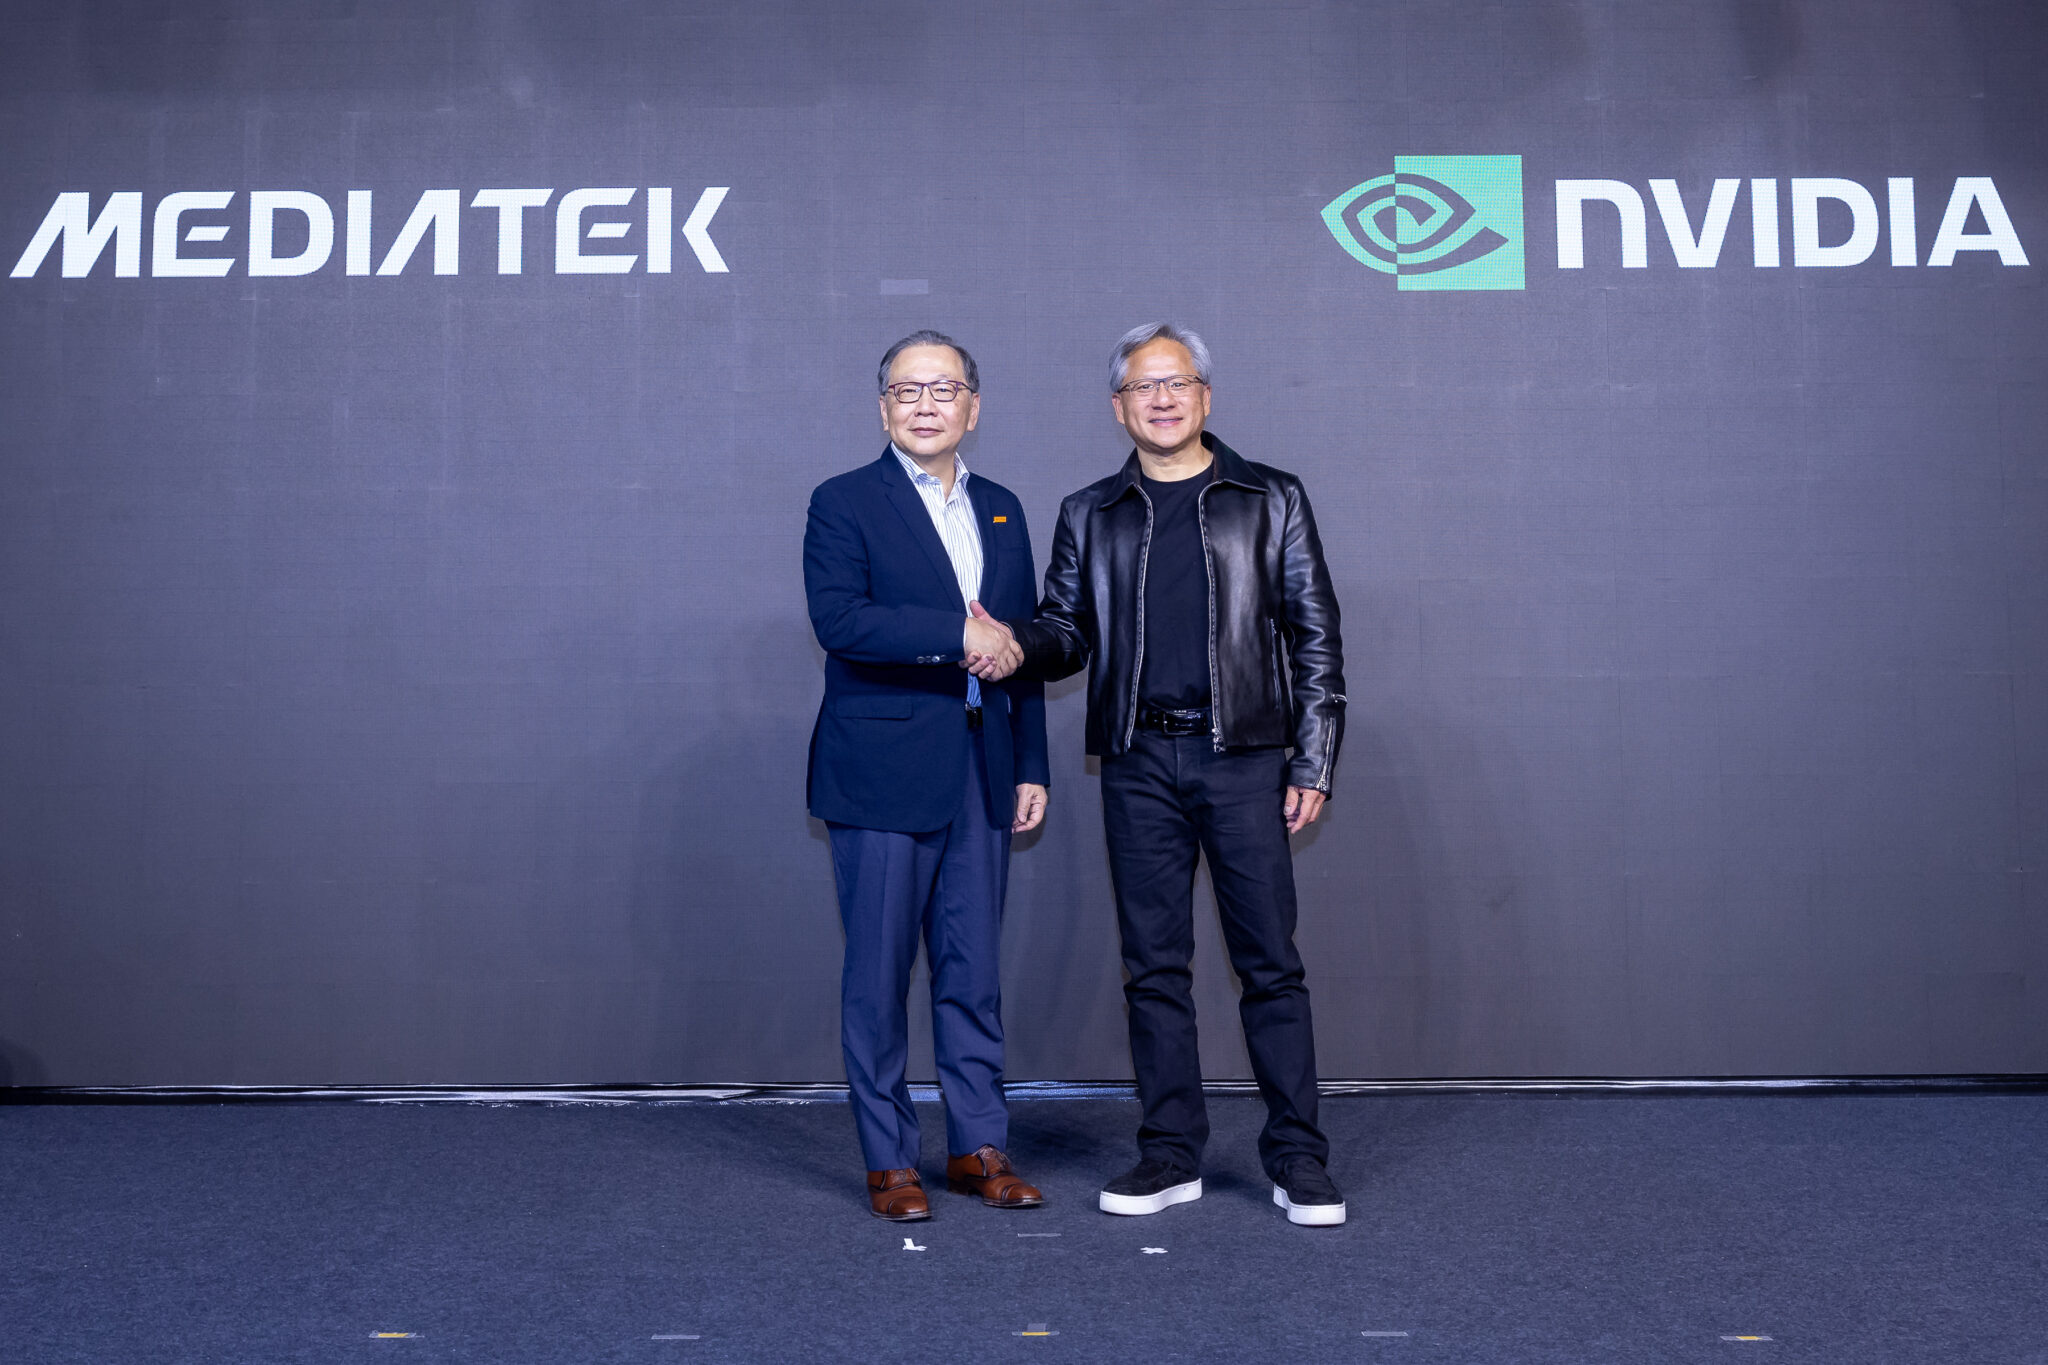 MediaTek Partners with NVIDIA to Transform Cars with Artificial Intelligence and Accelerated Computing |  Nvidia blog